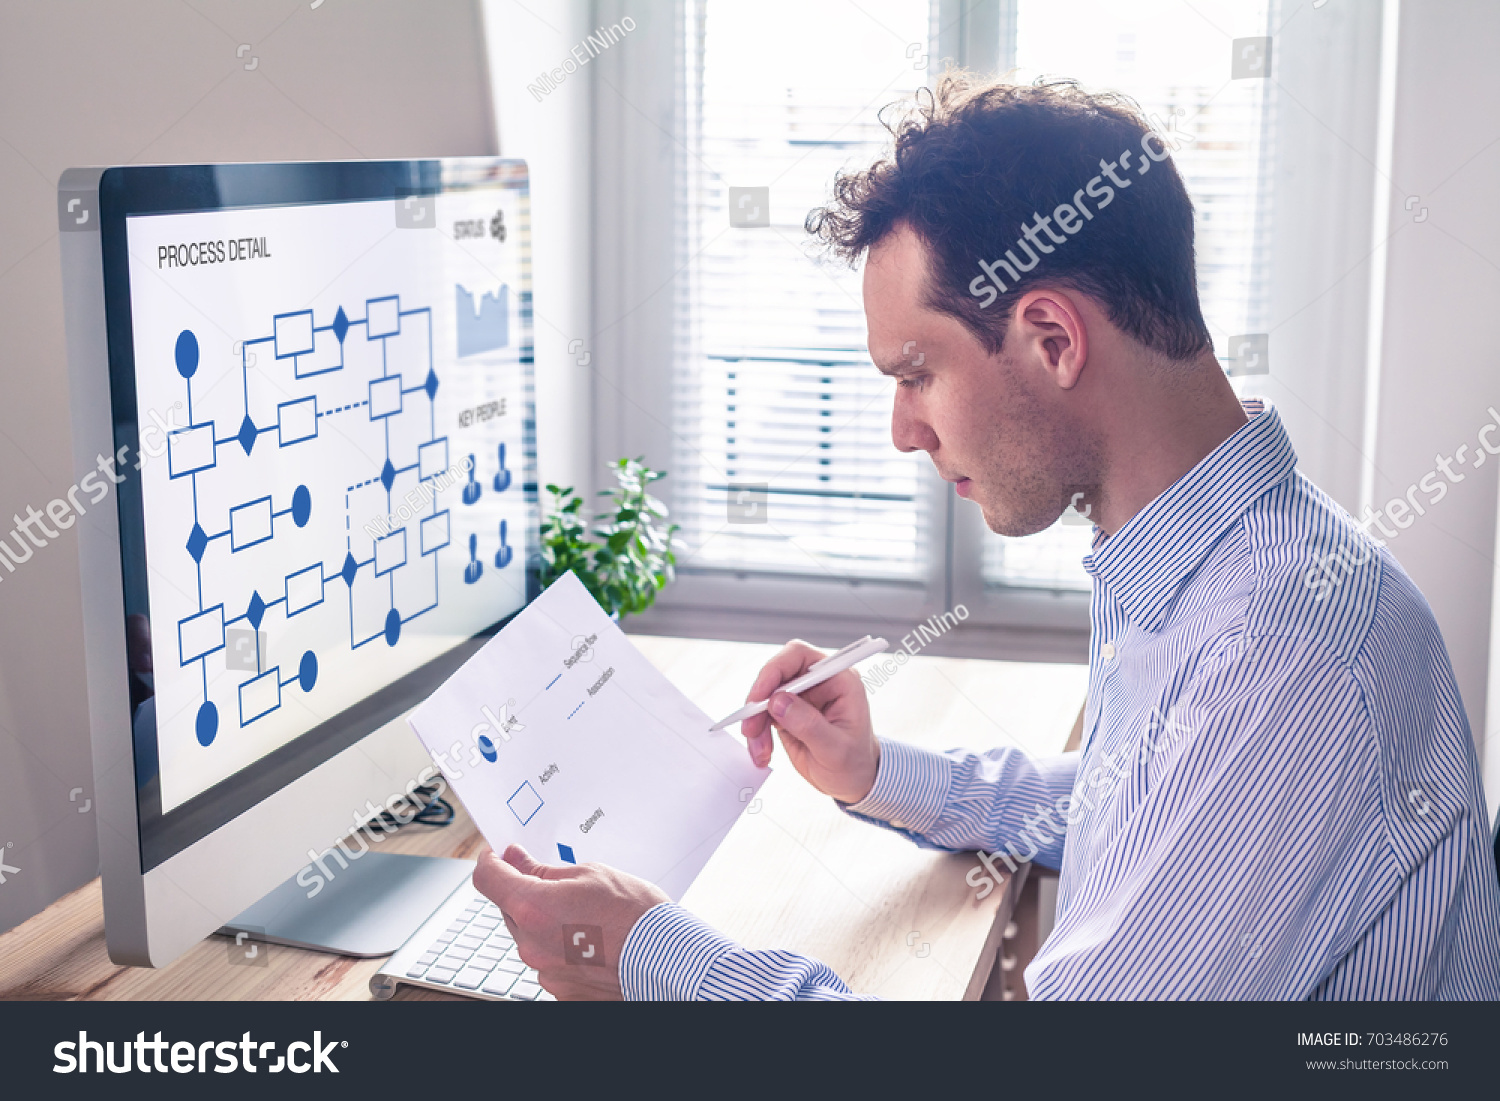 Businessman or engineer working on business process automation or algorithm with flowchart on computer screen #703486276